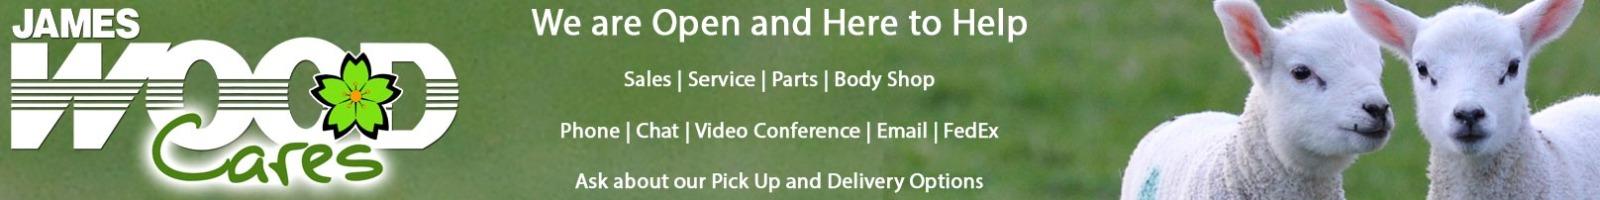 James Wood Cares - We Are Open & Here to Help - Ask About Our Pick up And Delivery Options